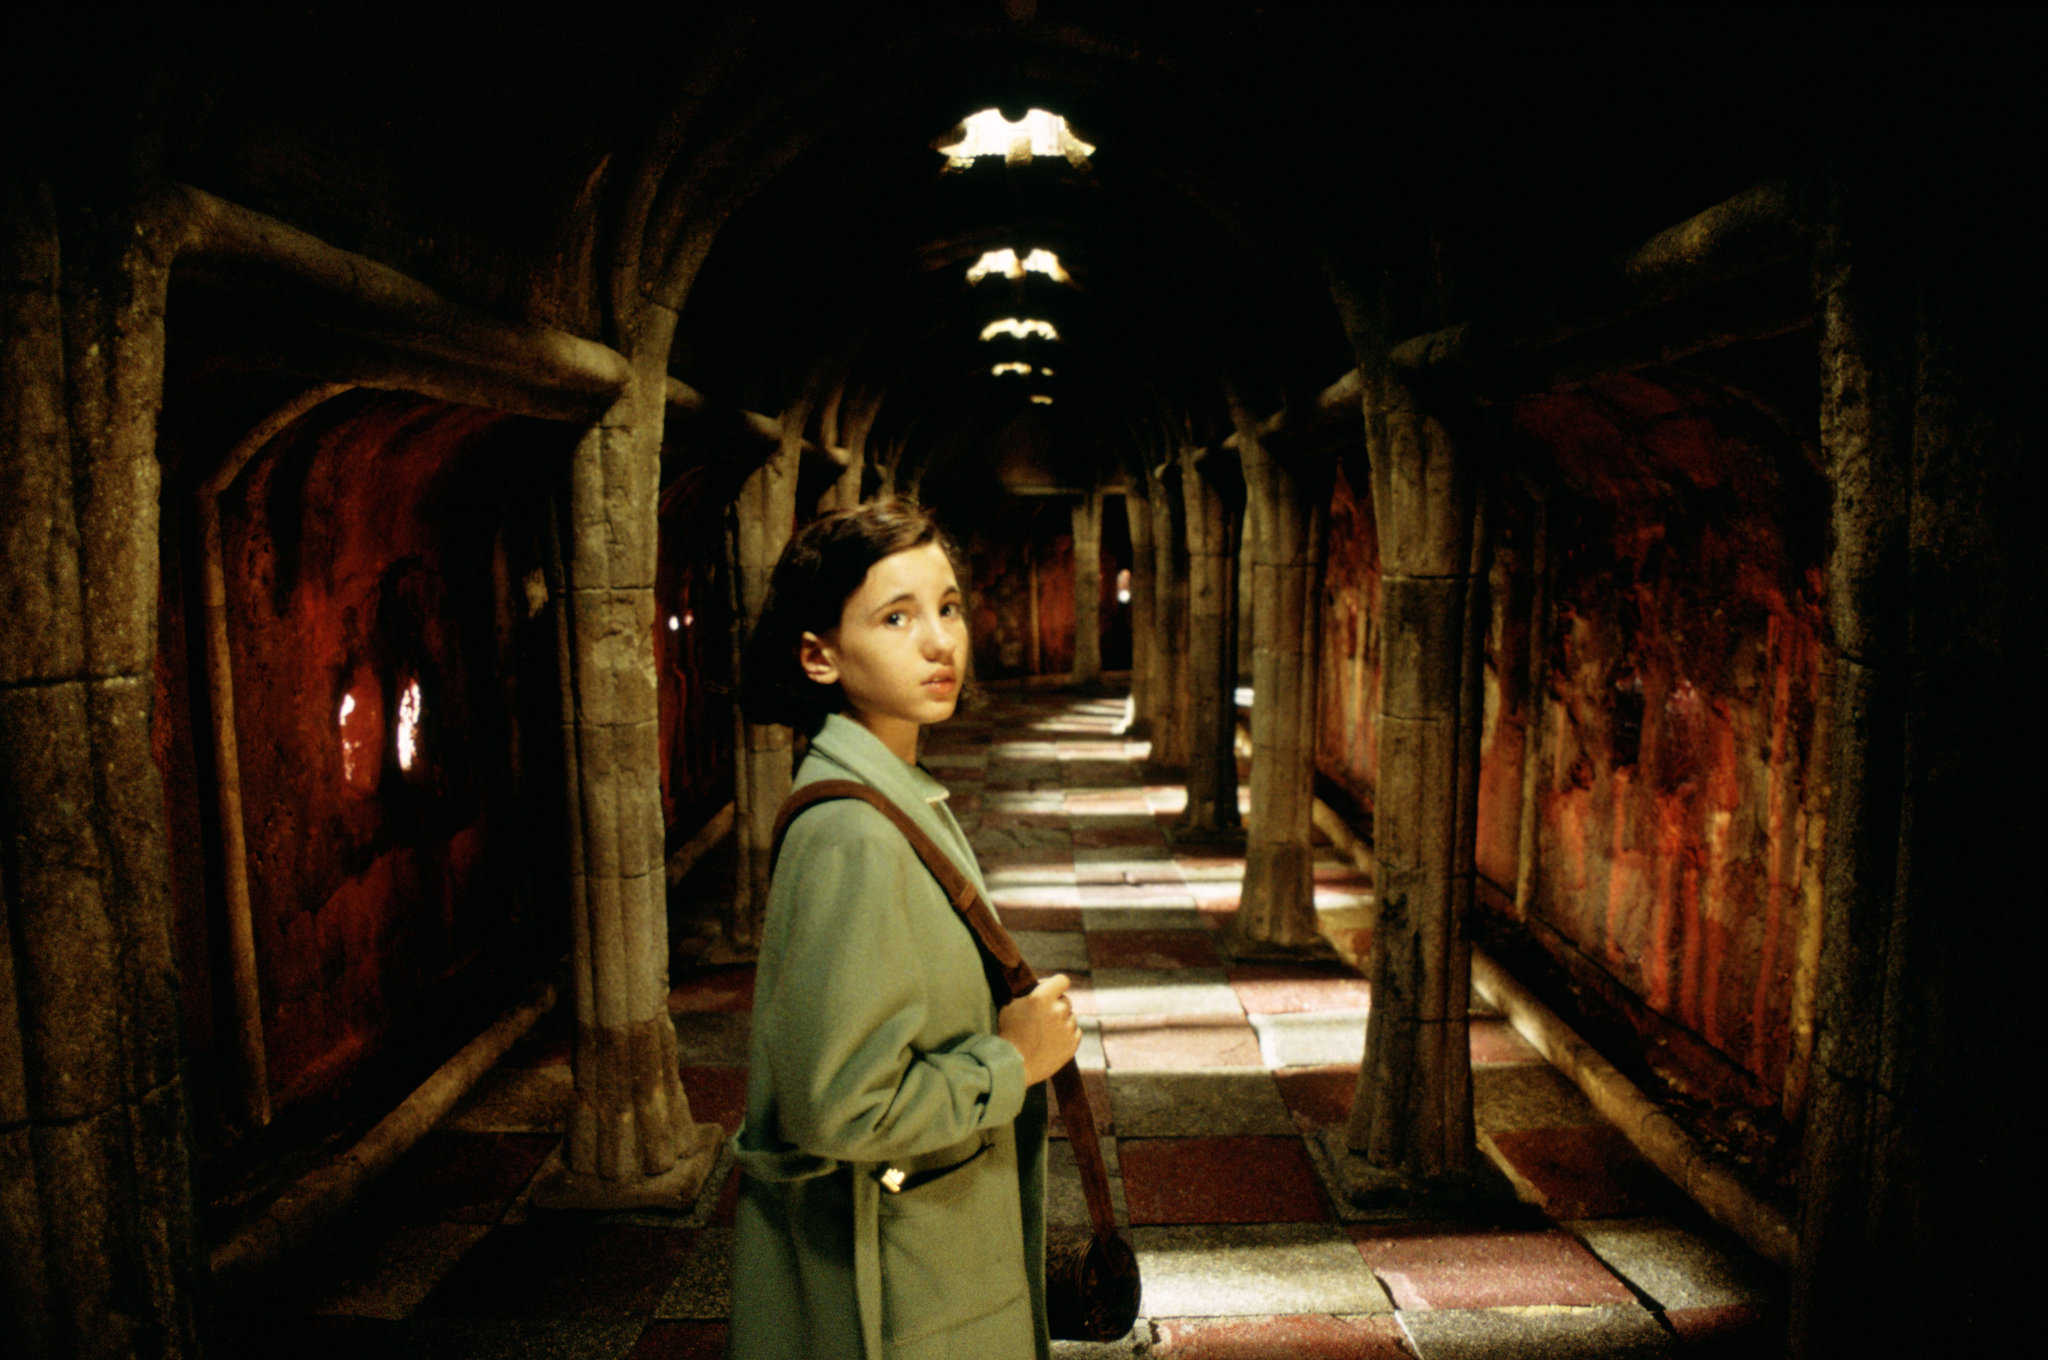 A girl looks over her shoulder in a magical hallway in this image from Estudios Picasso.